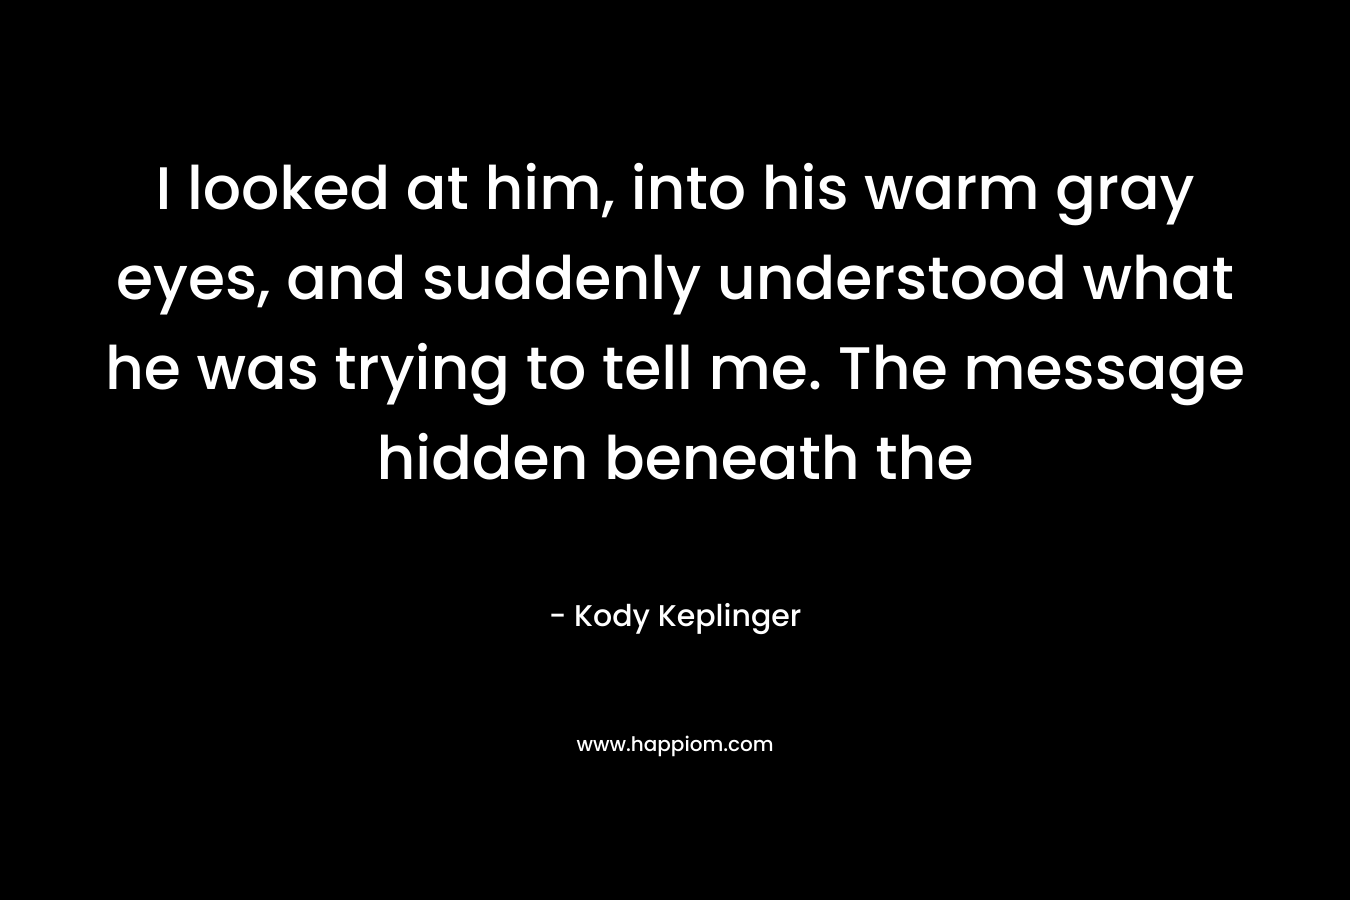 I looked at him, into his warm gray eyes, and suddenly understood what he was trying to tell me. The message hidden beneath the  – Kody Keplinger